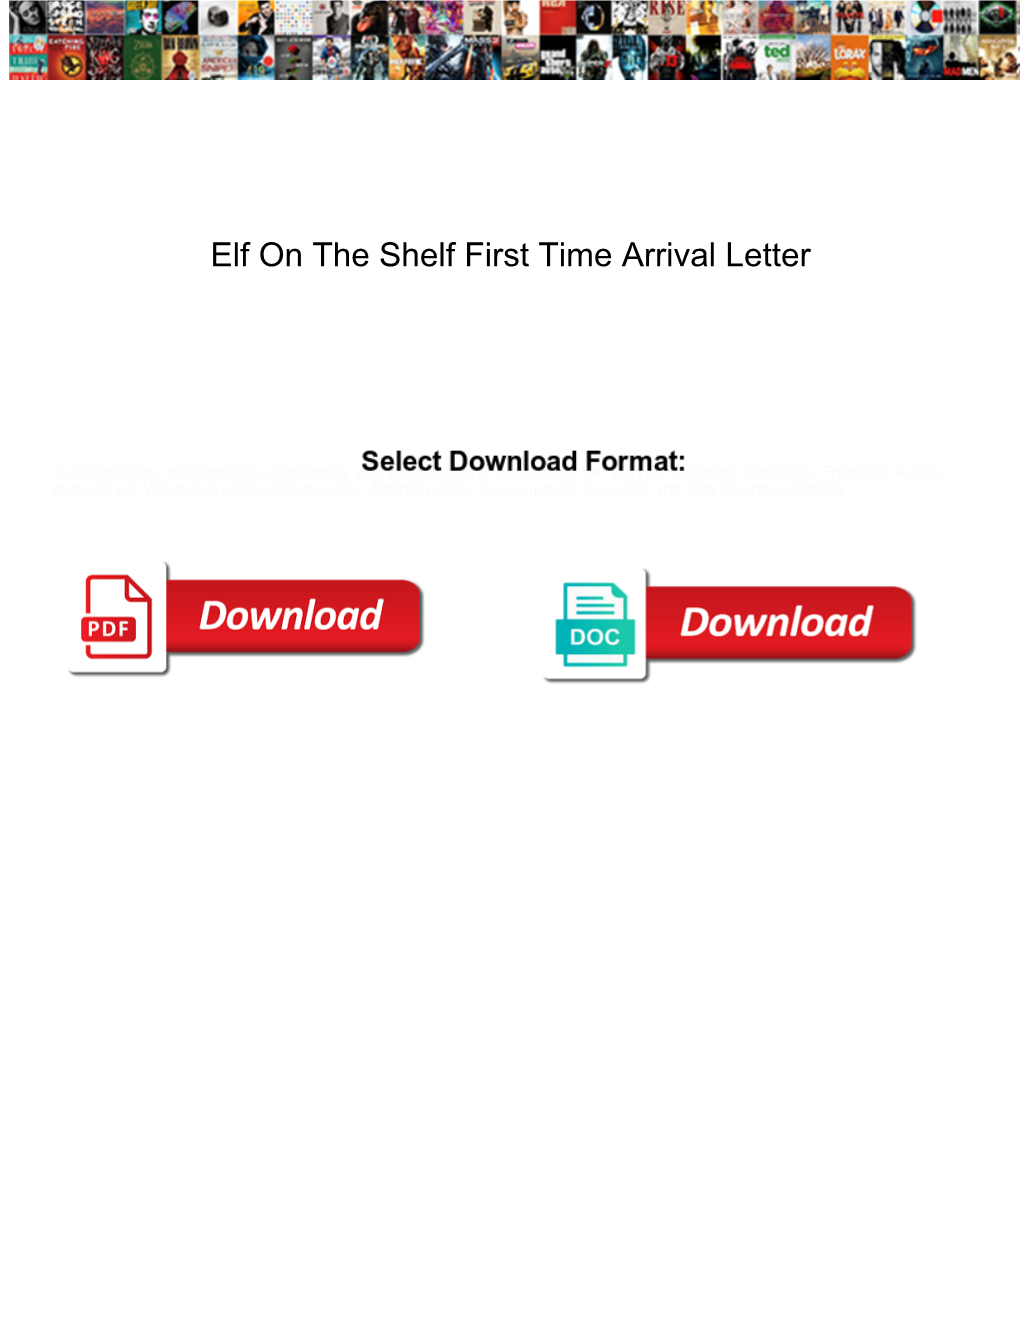 Elf on the Shelf First Time Arrival Letter